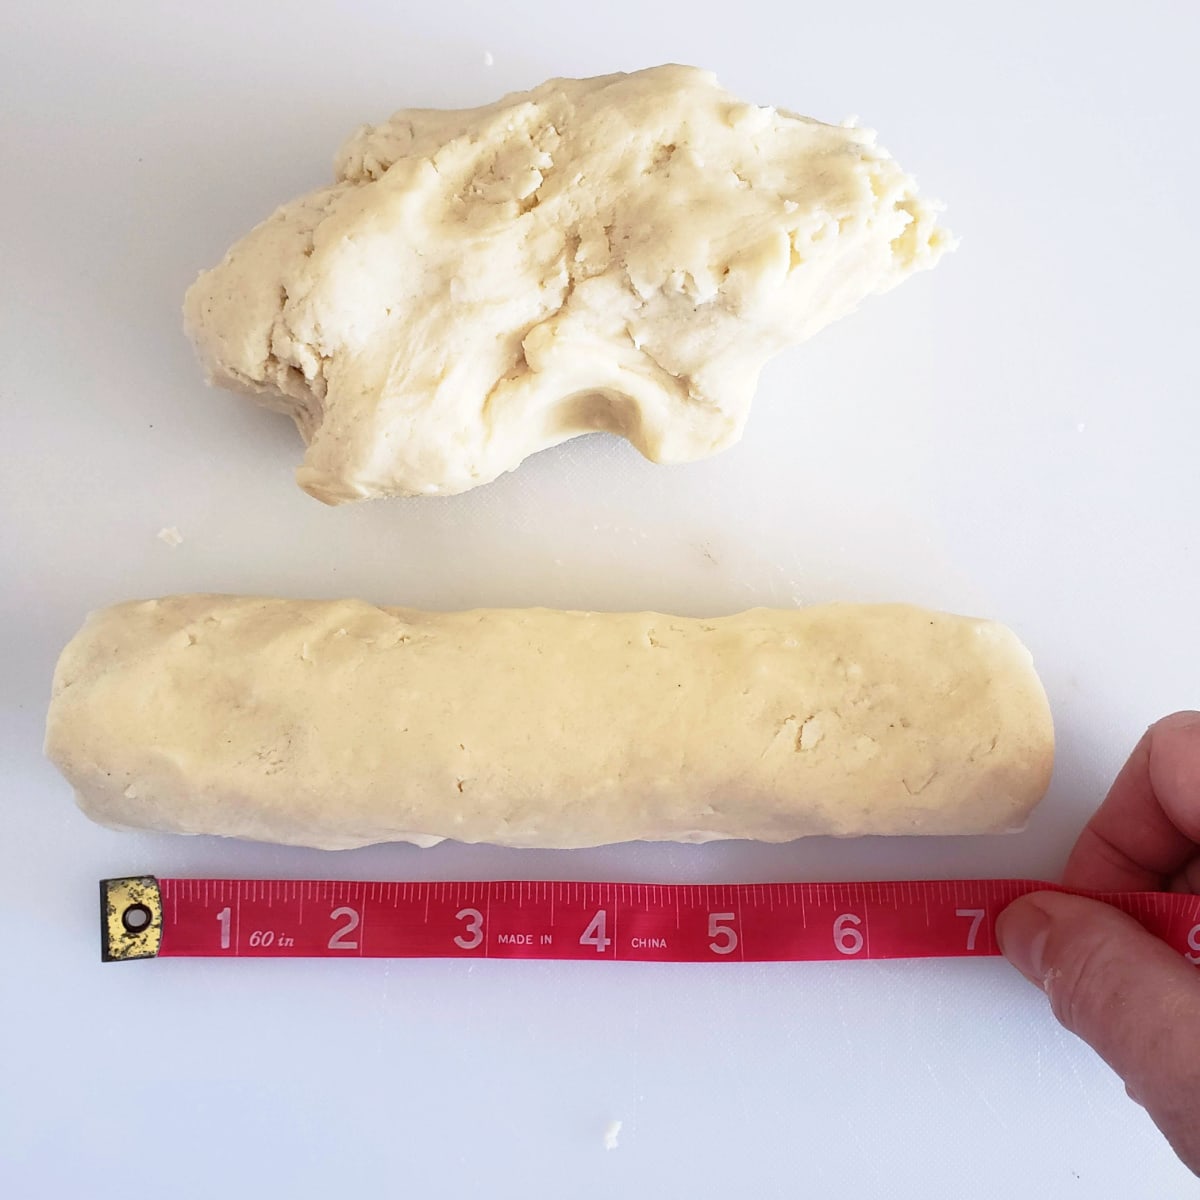 1 roll of Coconut Lime Shortbread dough is being measured by a pink tape measure, while a pile of unshaped dough rests behind it on a white cutting board